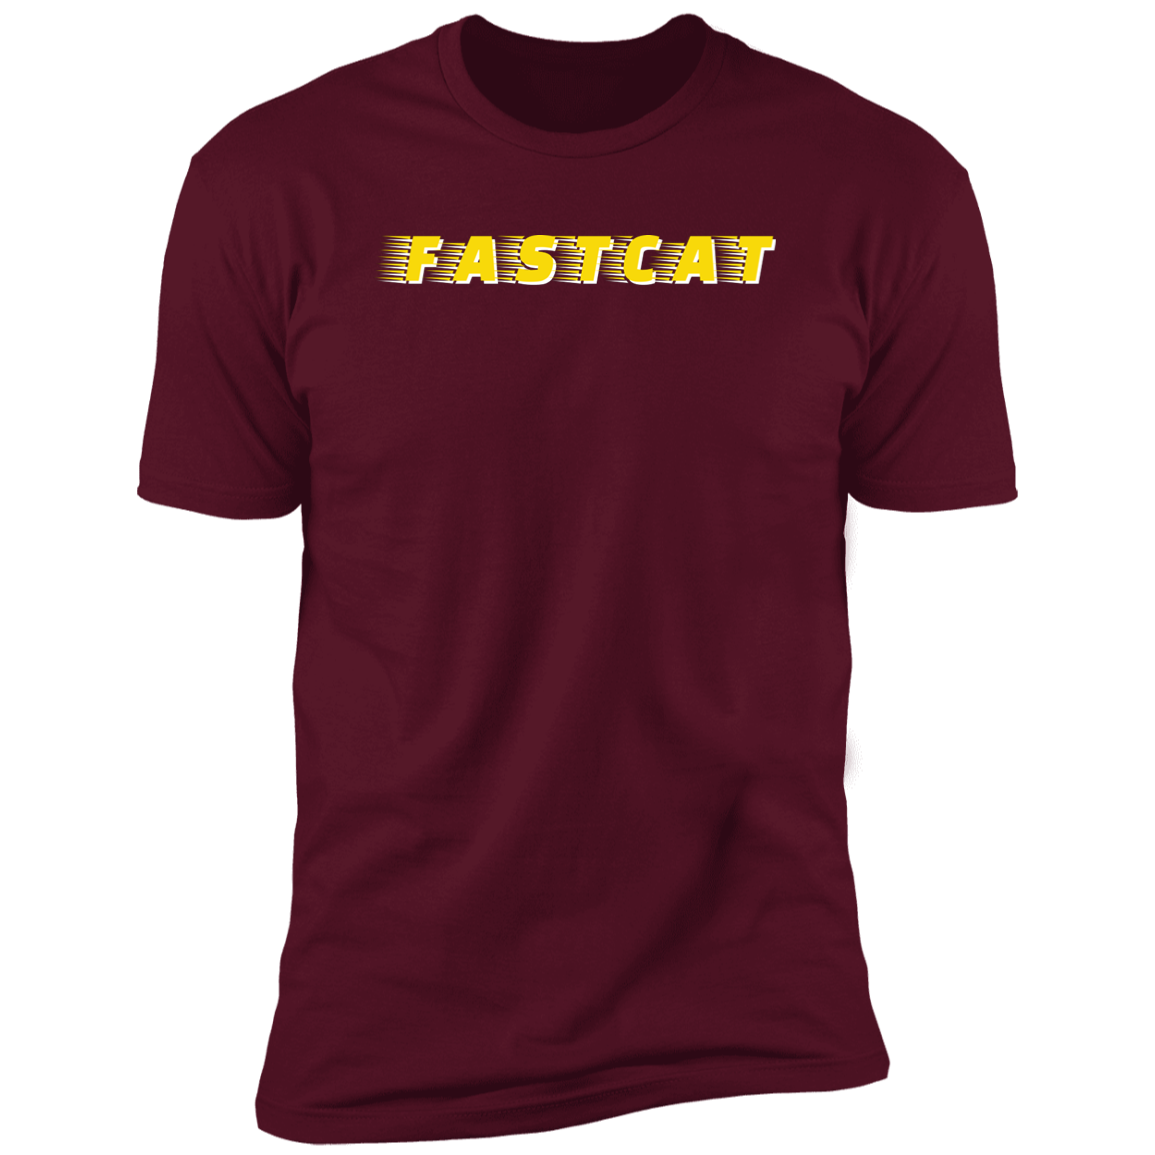 FastCAT Dog T-shirt, sporting dog t-shirt for humans, FastCAT t-shirt, in maroon